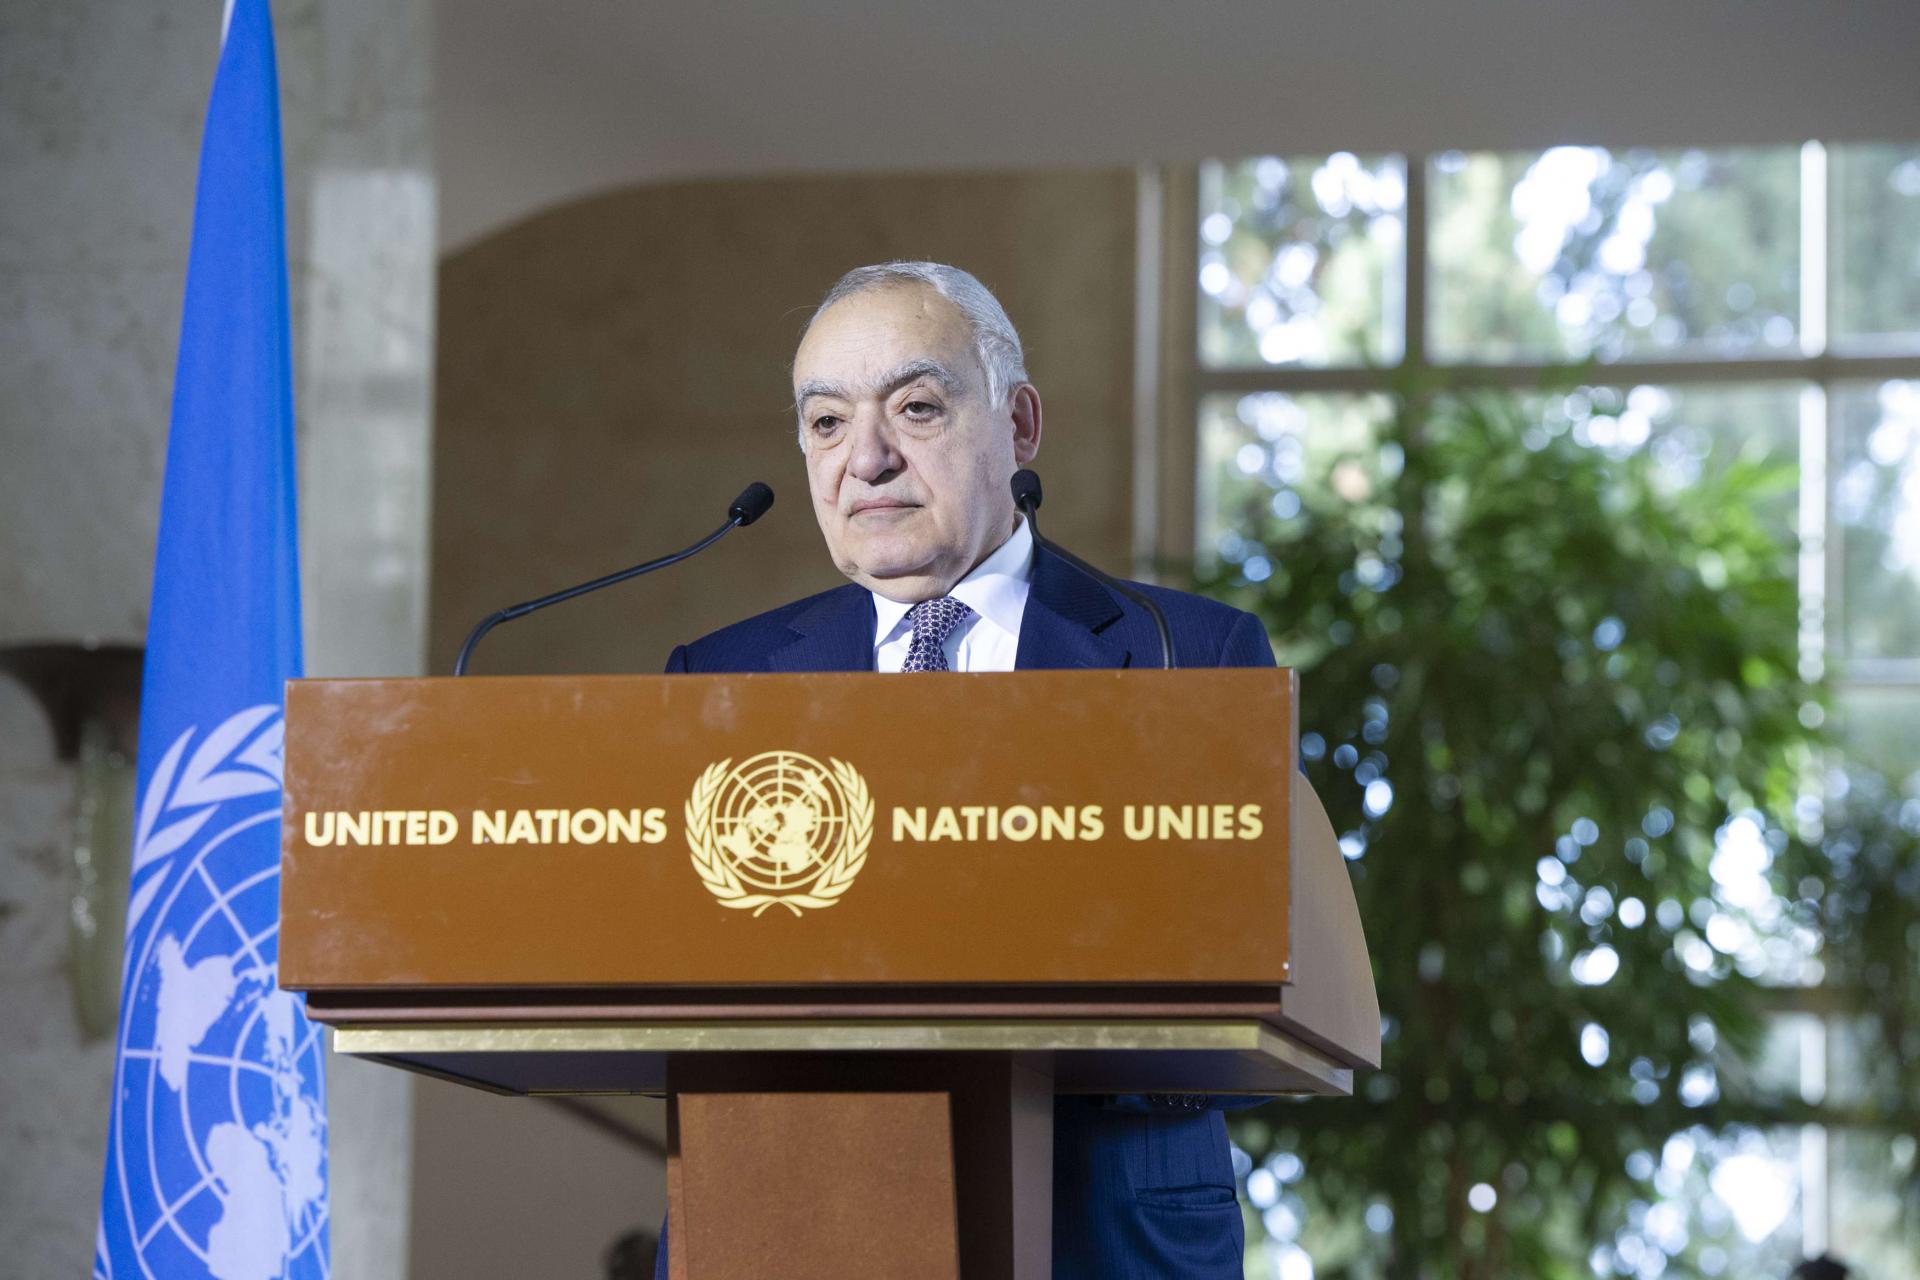 Ghassan Salame, Special representative of the UN Secretary-General and Head of the UN Support Mission in Libya